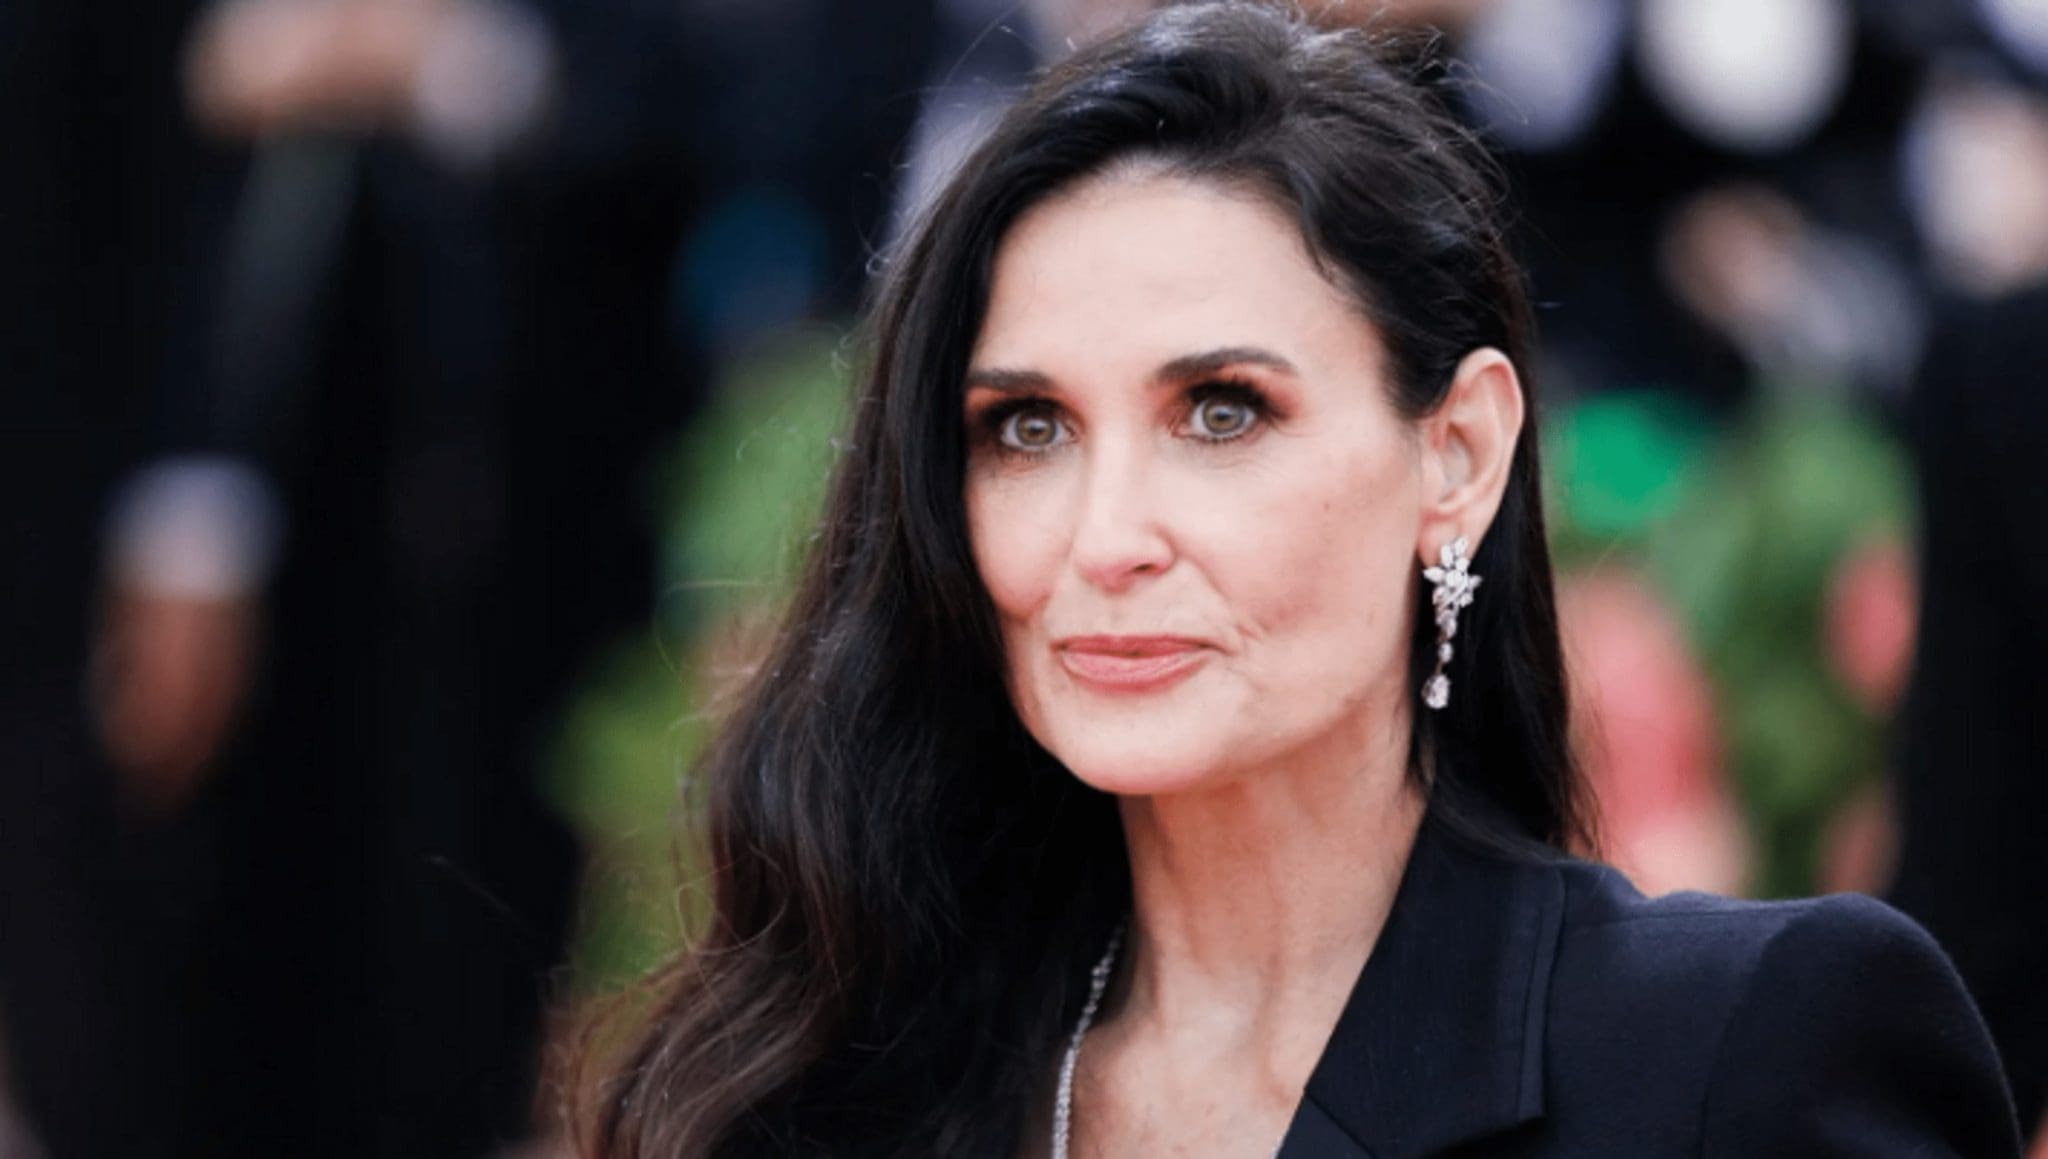 Demi Moore has released a collection of swimwear in sizes from XS to 3XL